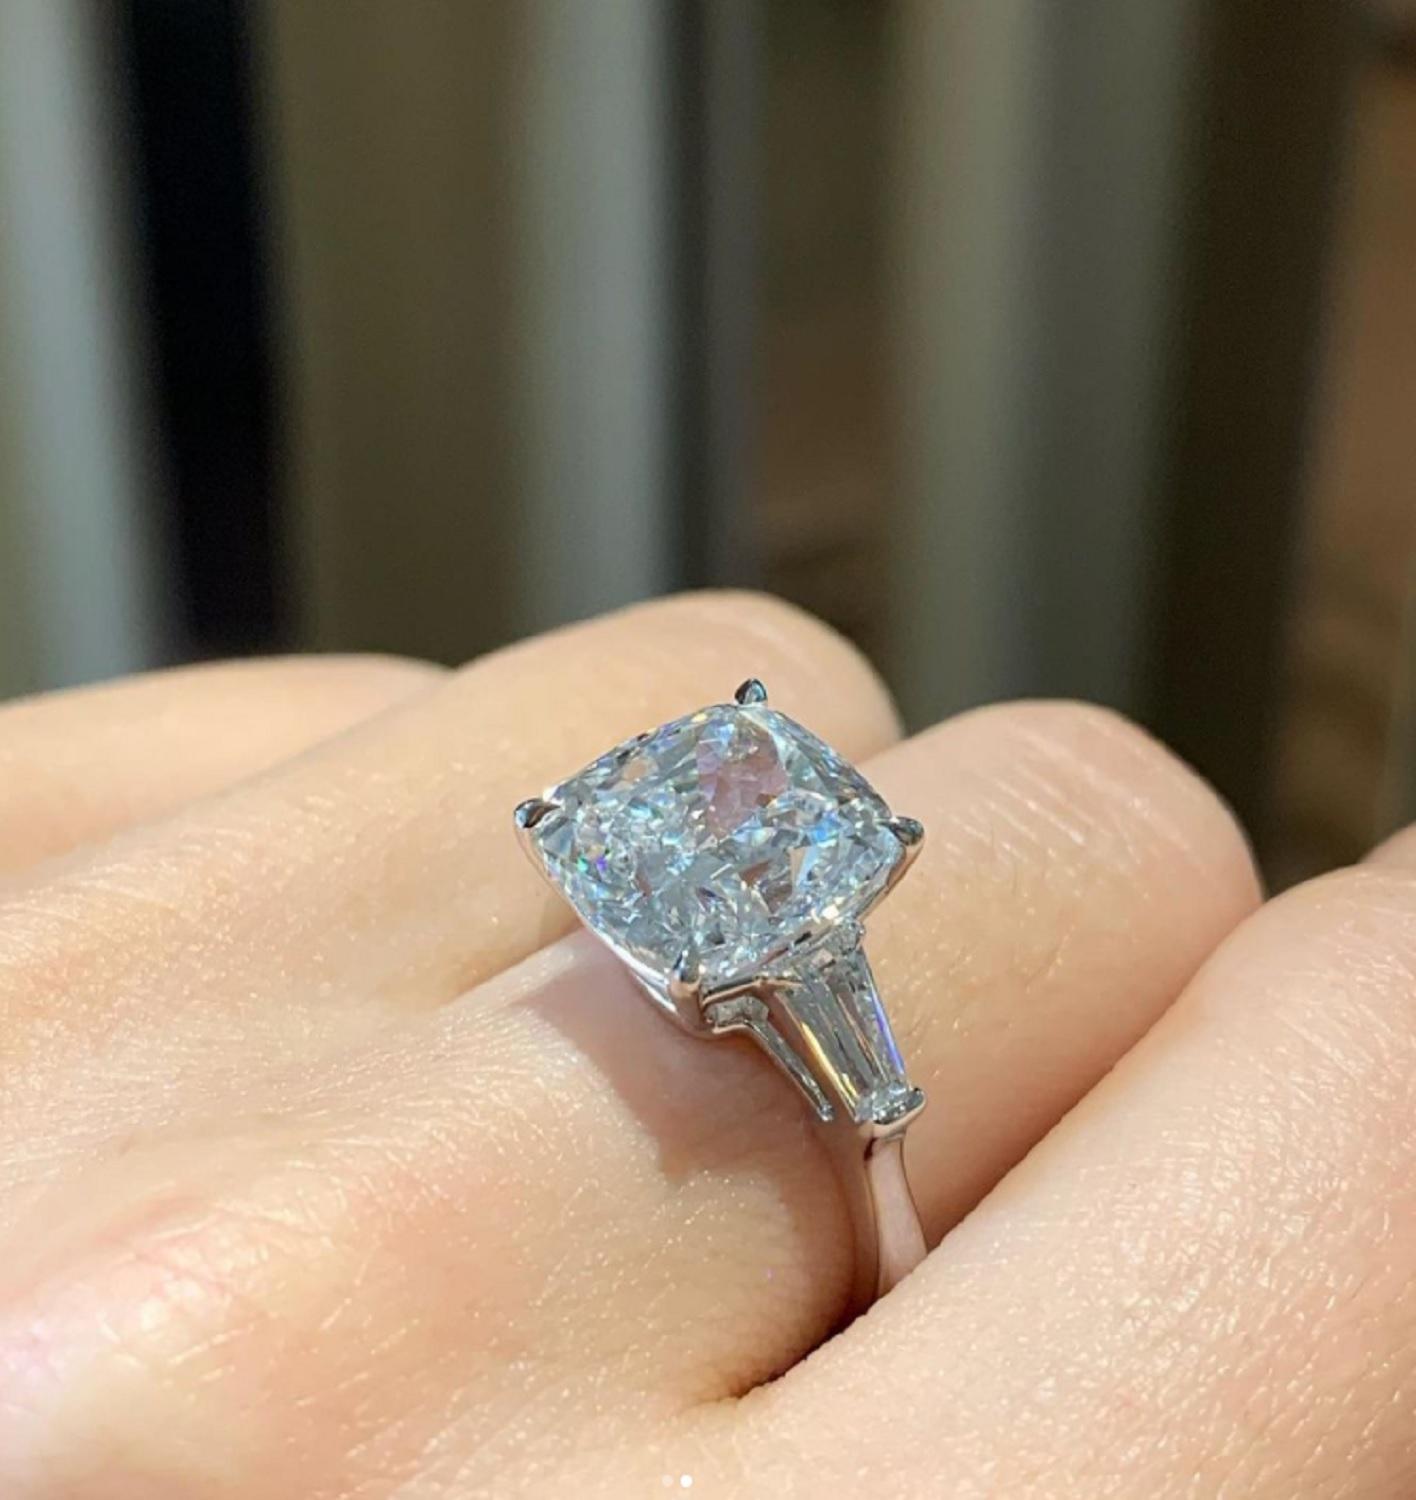 An exquisite ring composed by a perfect 3 carat cushion cut diamond with two side tapered baguette diamonds
the setting is made in solid 18 carats white gold